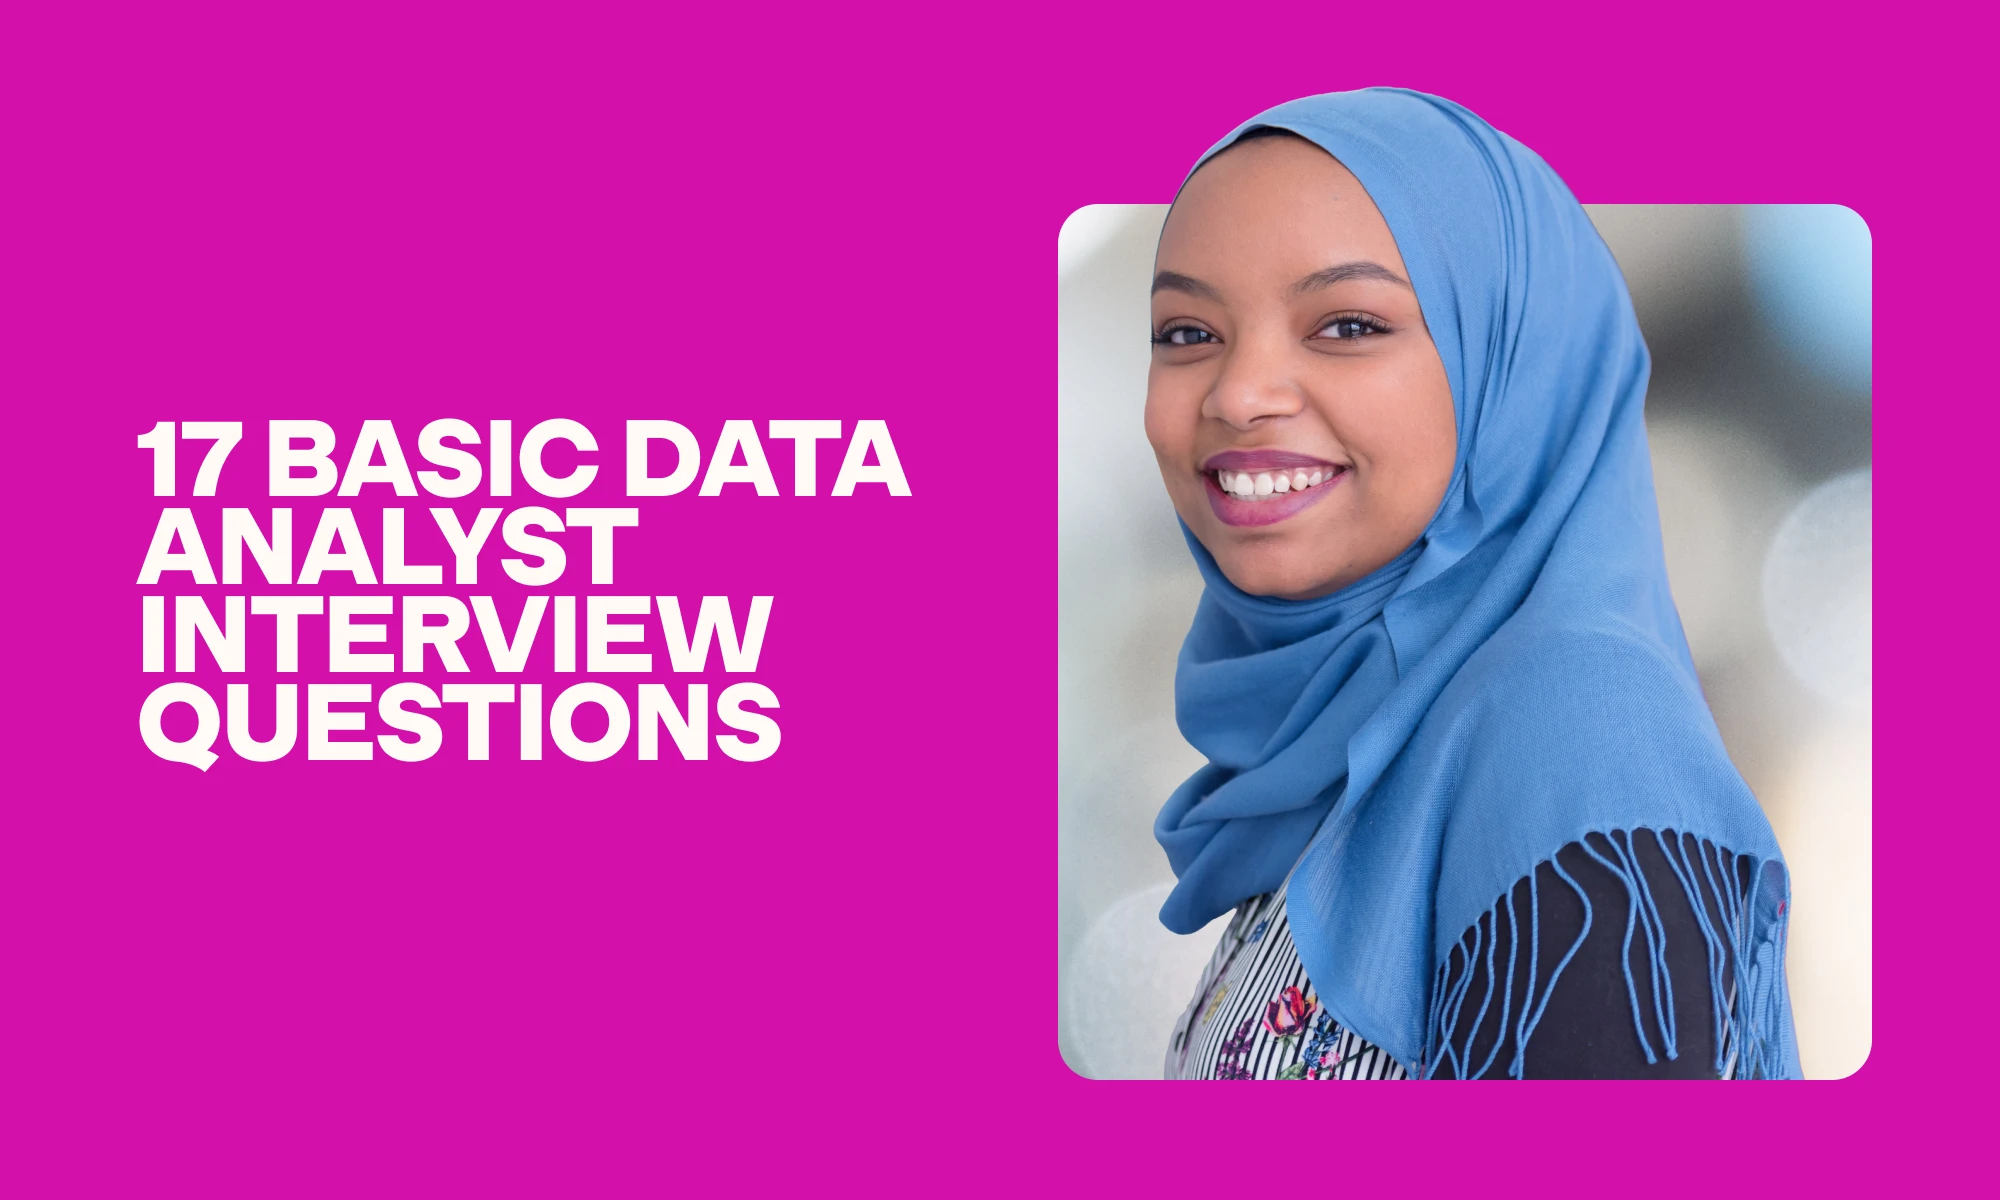 image showing 19 basic data analyst interview questions